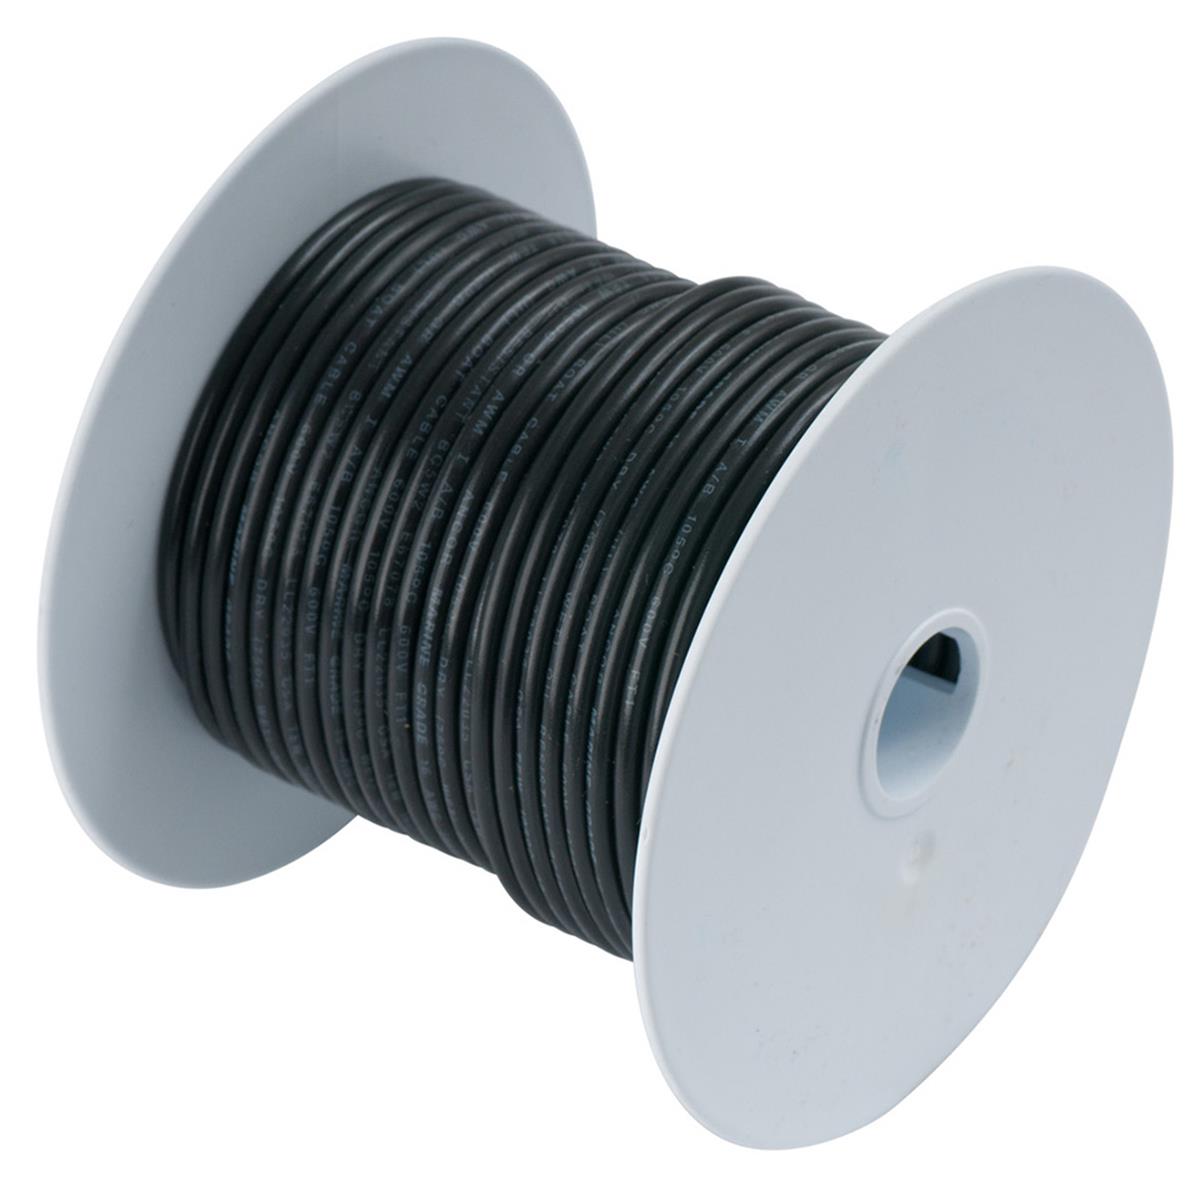 Picture of Ancor 112025 Ancor Black 6 Awg Tinned Copper Wire - 250 ft.